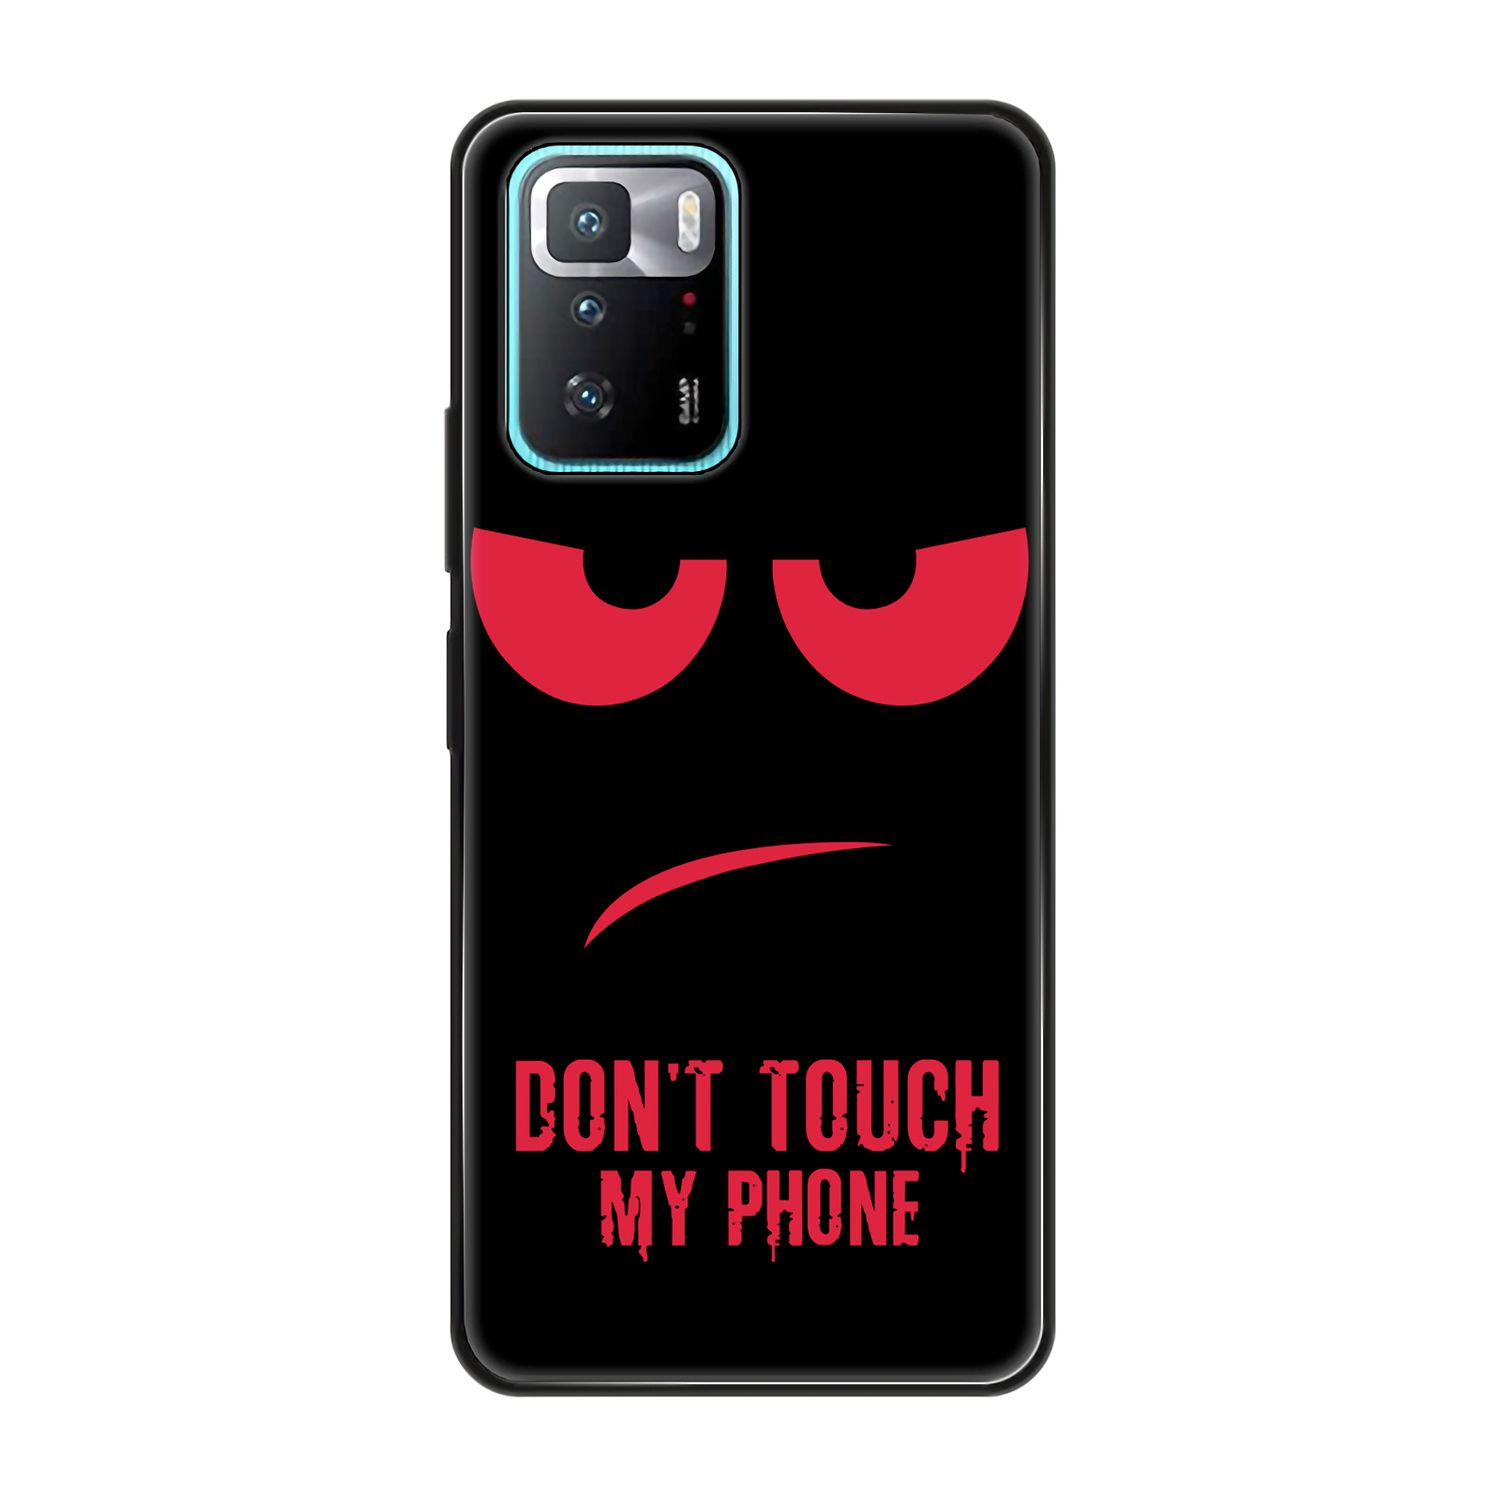 My Backcover, X3 Phone GT, Dont Poco Touch Case, DESIGN KÖNIG Rot Xiaomi,